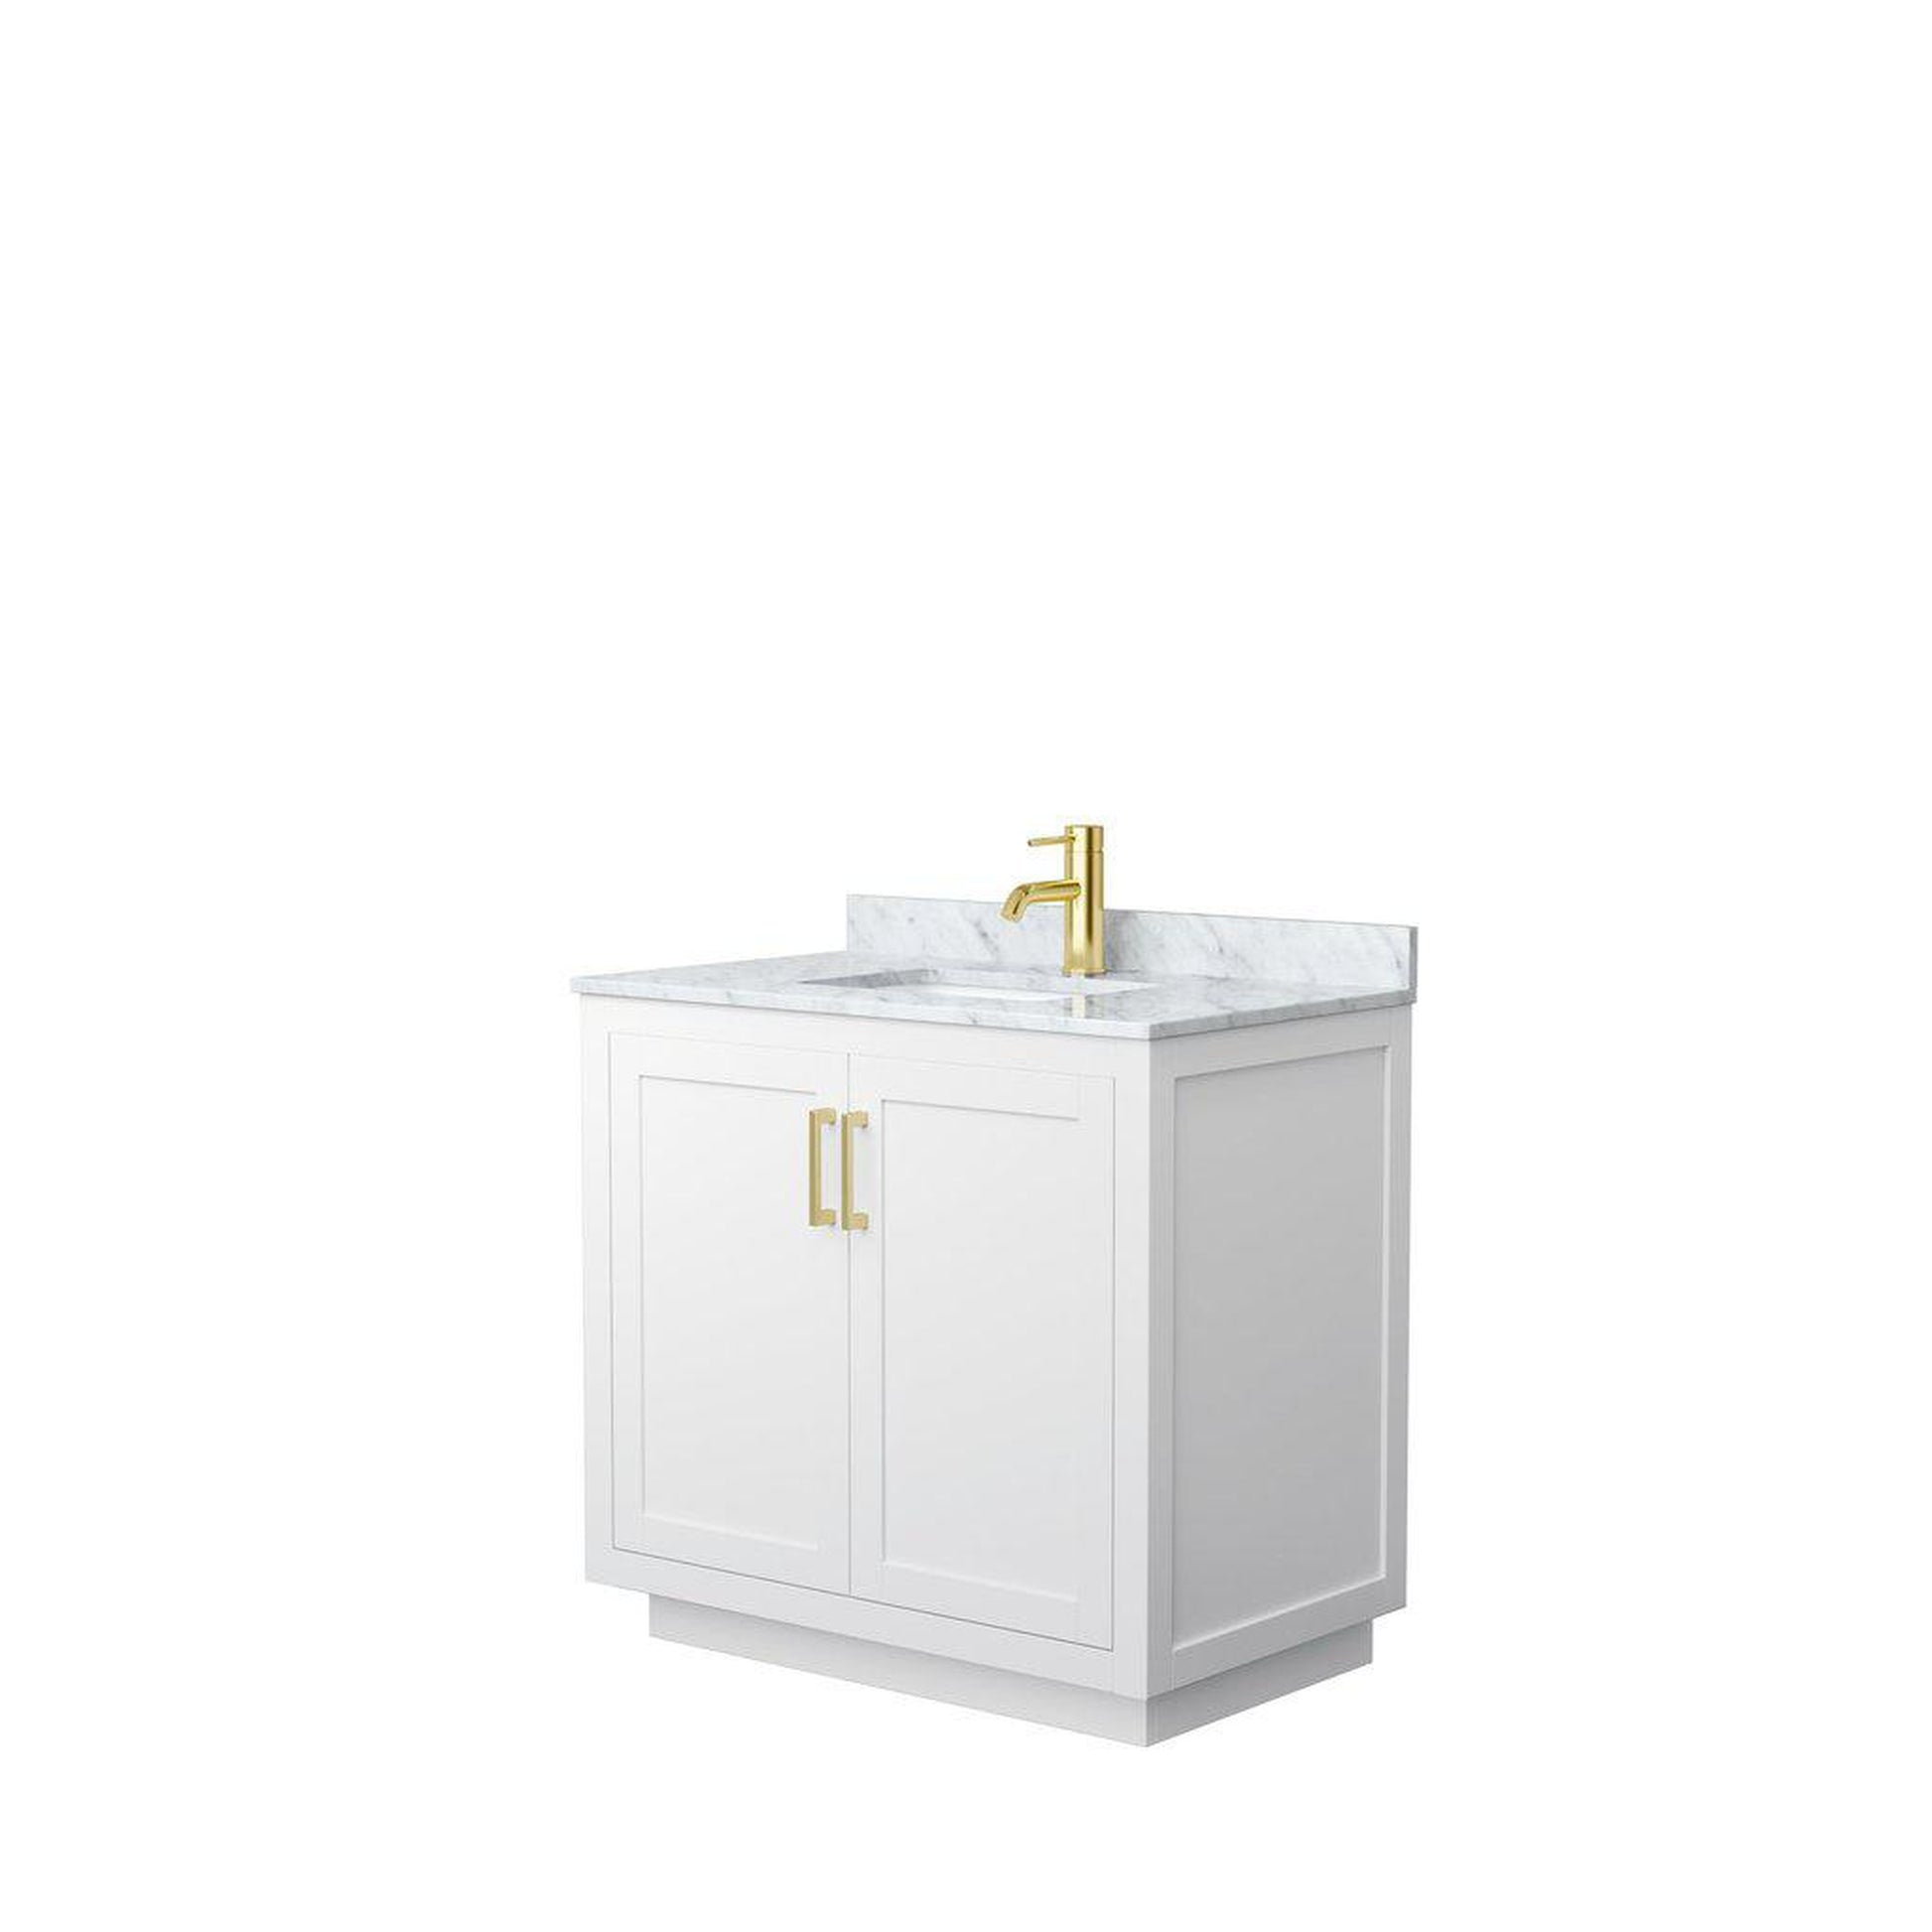 Wyndham Collection Miranda 36" Single Bathroom White Vanity Set With White Carrara Marble Countertop, Undermount Square Sink, And Brushed Gold Trim